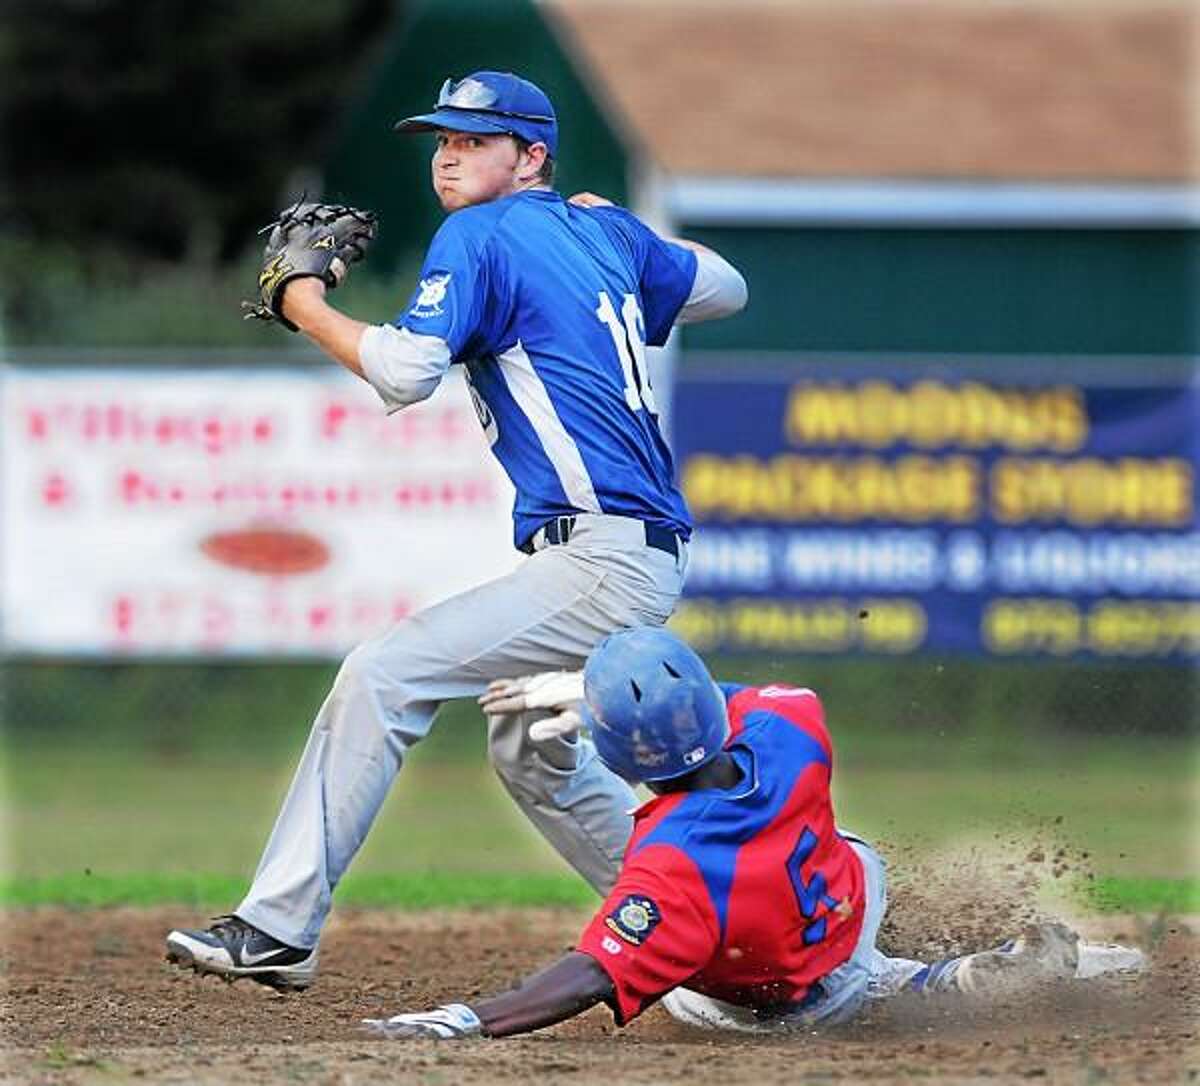 Middletown's Malcolm Allyene is forced out at second by East Haddam 's Troy DeLeone Tuesday evening at Memorial Field in East Haddam. Post 156 defeated Middletown 5-2. Photo by Catherine Avalone - The Middletown Press